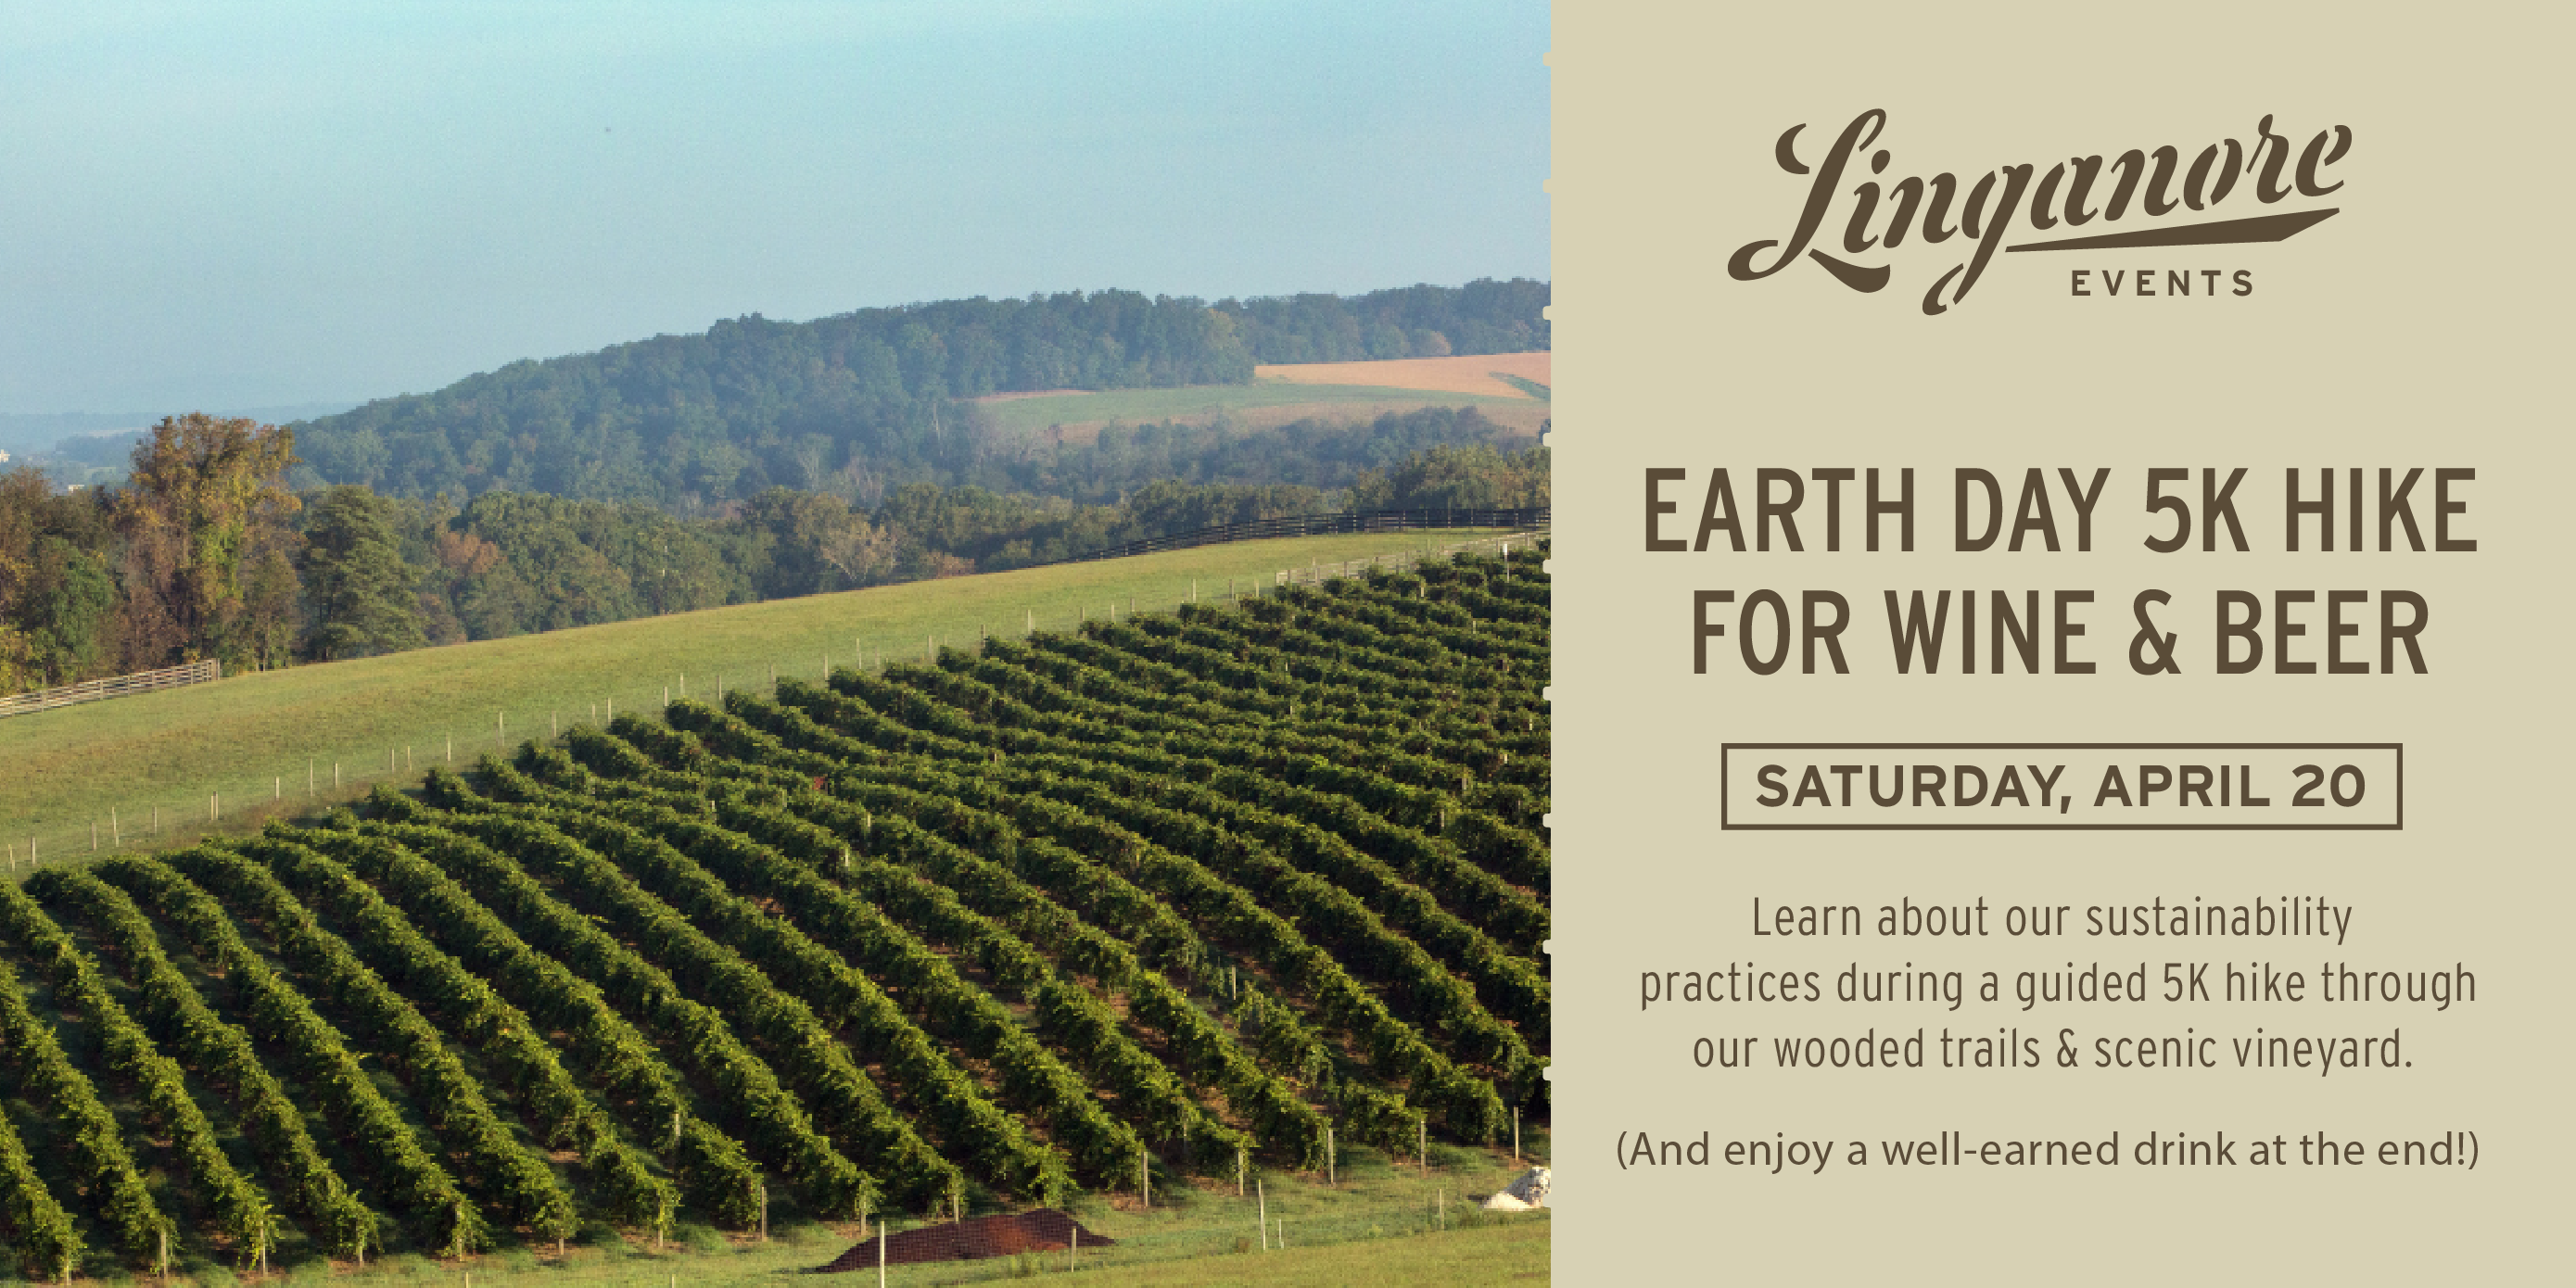 earth day hike 5k linganore wines